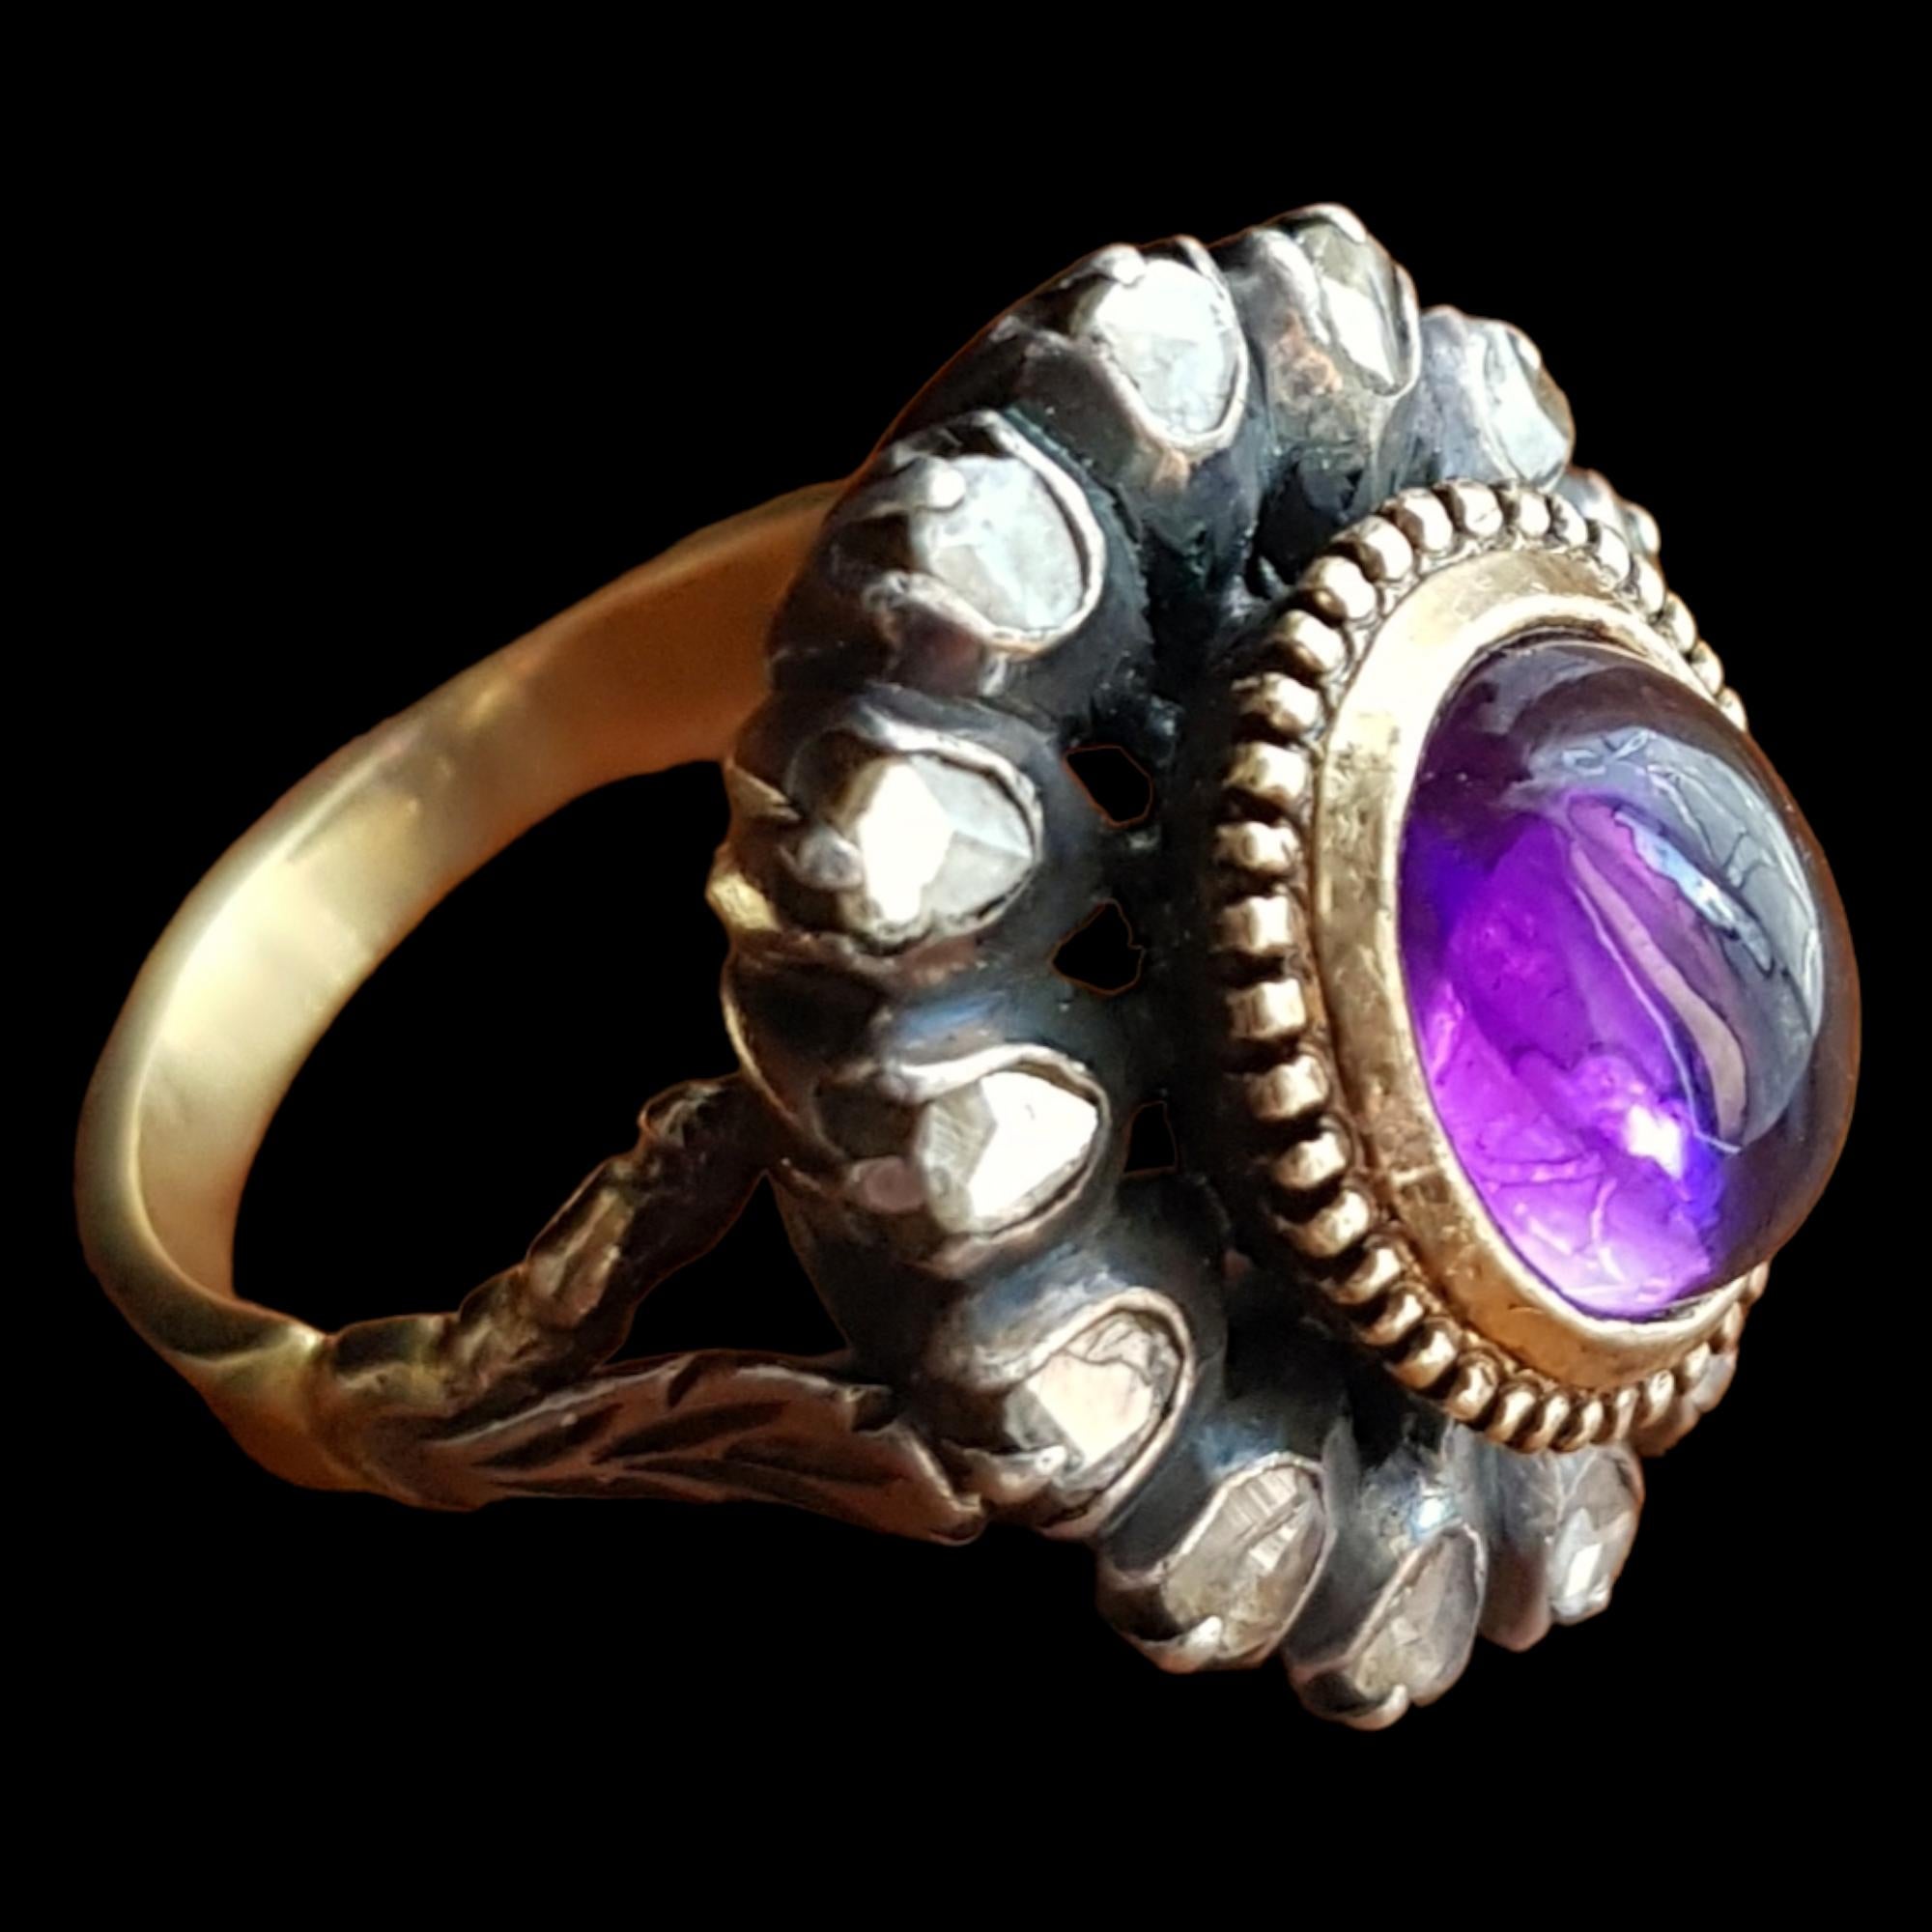 AMETHYST CABOCHON AND ROSE CUT DIAMOND RING

A lovely early Victorian ring set with a good deep color, bright purple cabochon shaped amethyst measuring approx. 2.70 carats (9.22X7.74X5.24mm). Surrounding it are graded 14 rose cut diamonds. The top